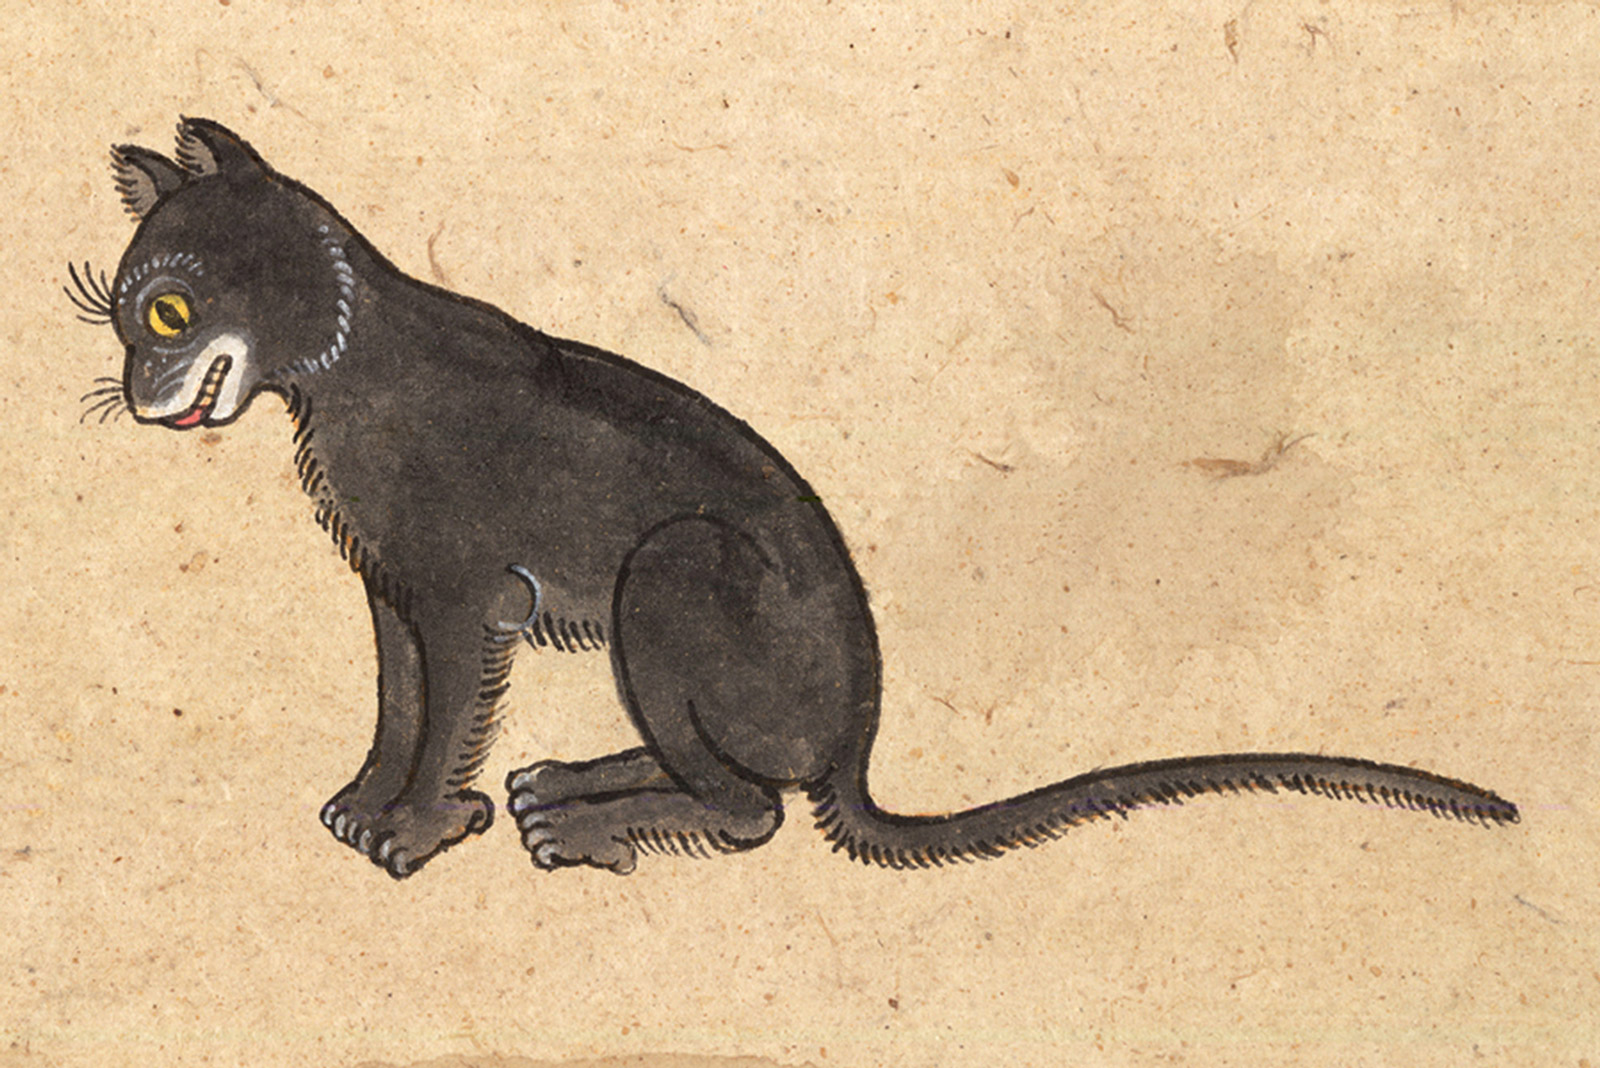 An illustration of a Krajork (Sparrow) cat from a mid-nineteenth-century manuscript titled “Tamra Maew.” The accompanying caption reads: “With the name Sparrow, a nice round frame.
Black body, the shaded background.
White fur, like clouds, floats around the mouth.
Eyes a mix of fresh colors, like gamboge pigment.”